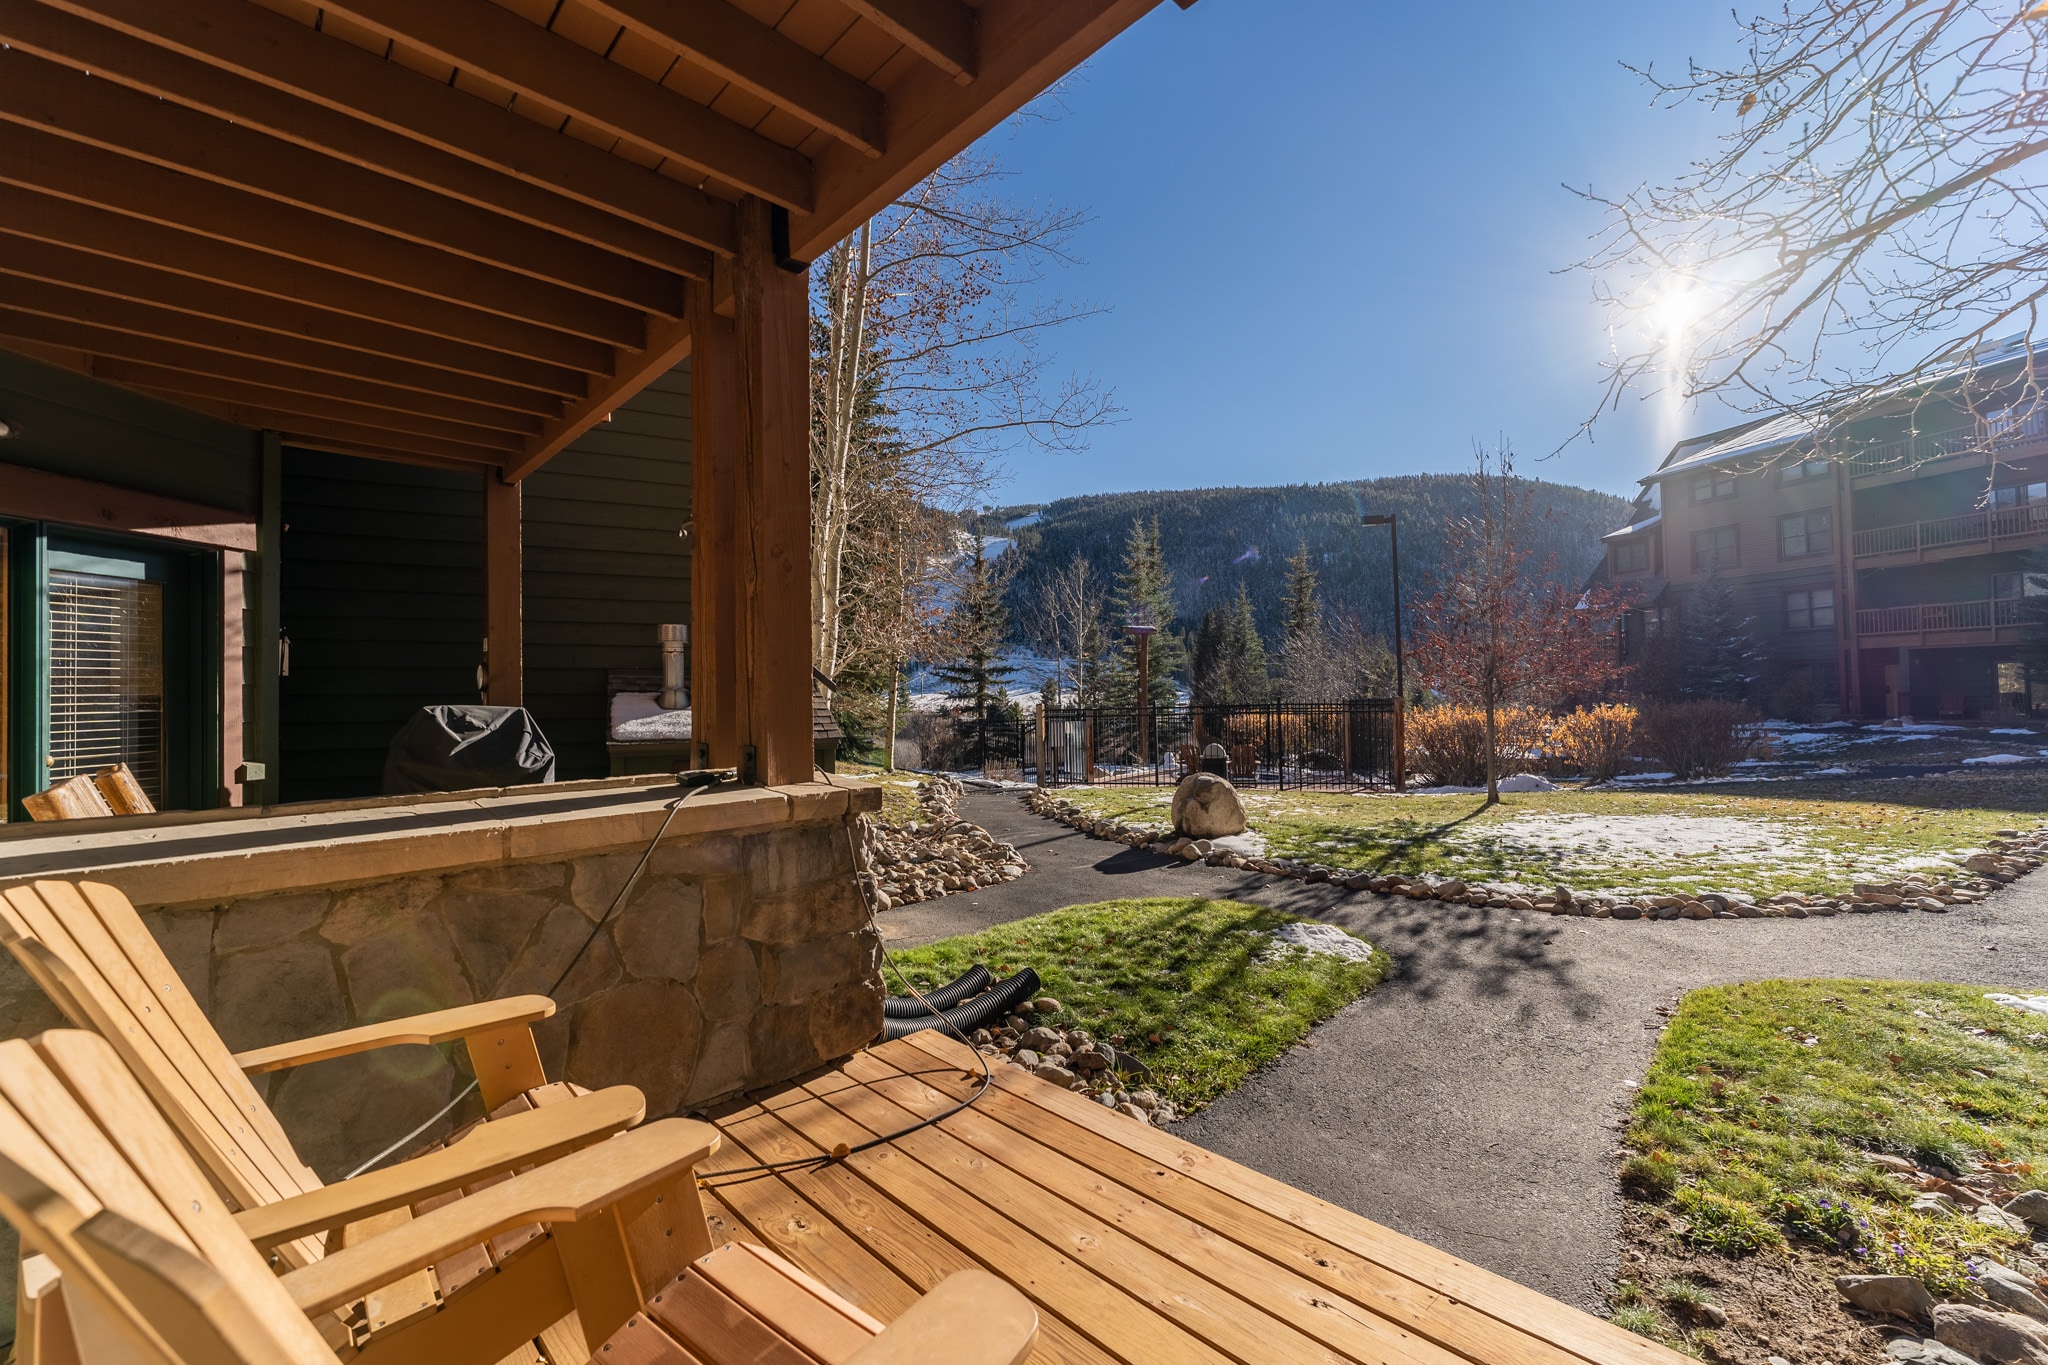 Private patio offering seating and mountain/ski slope views.